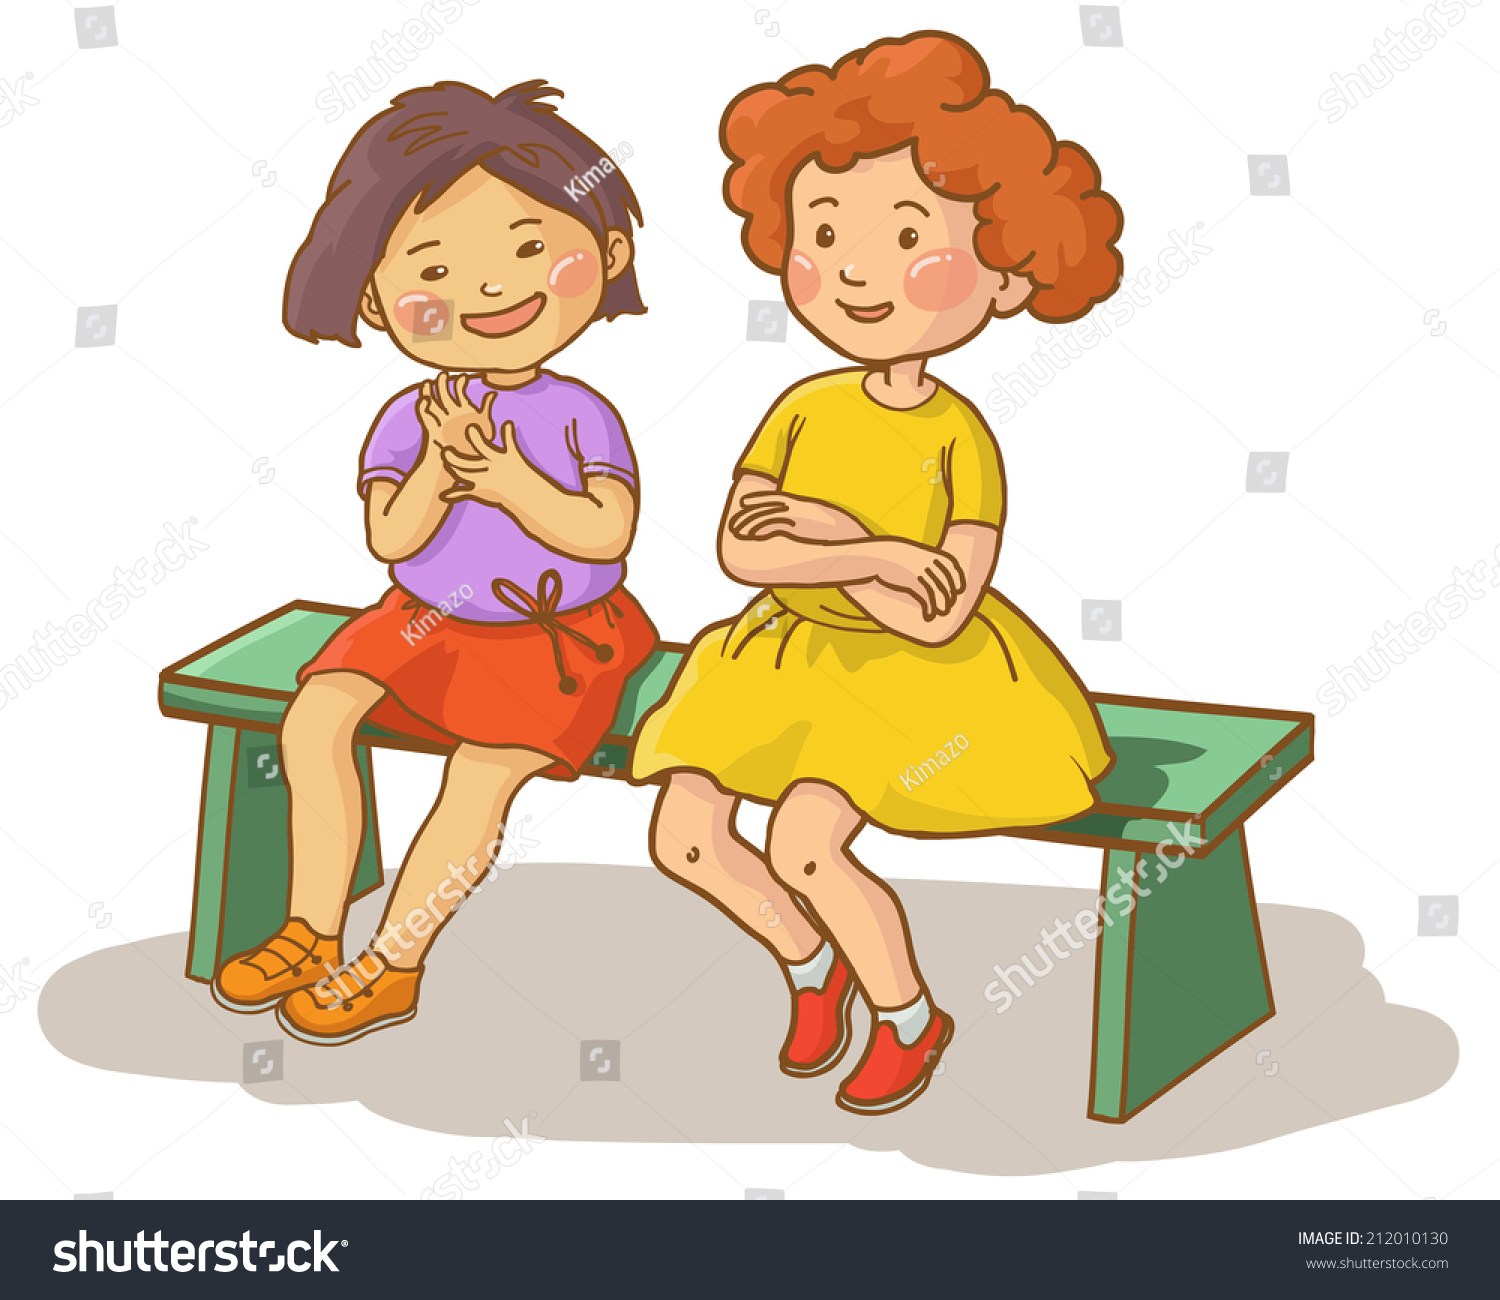 Girls talking clipart clipart images gallery for free